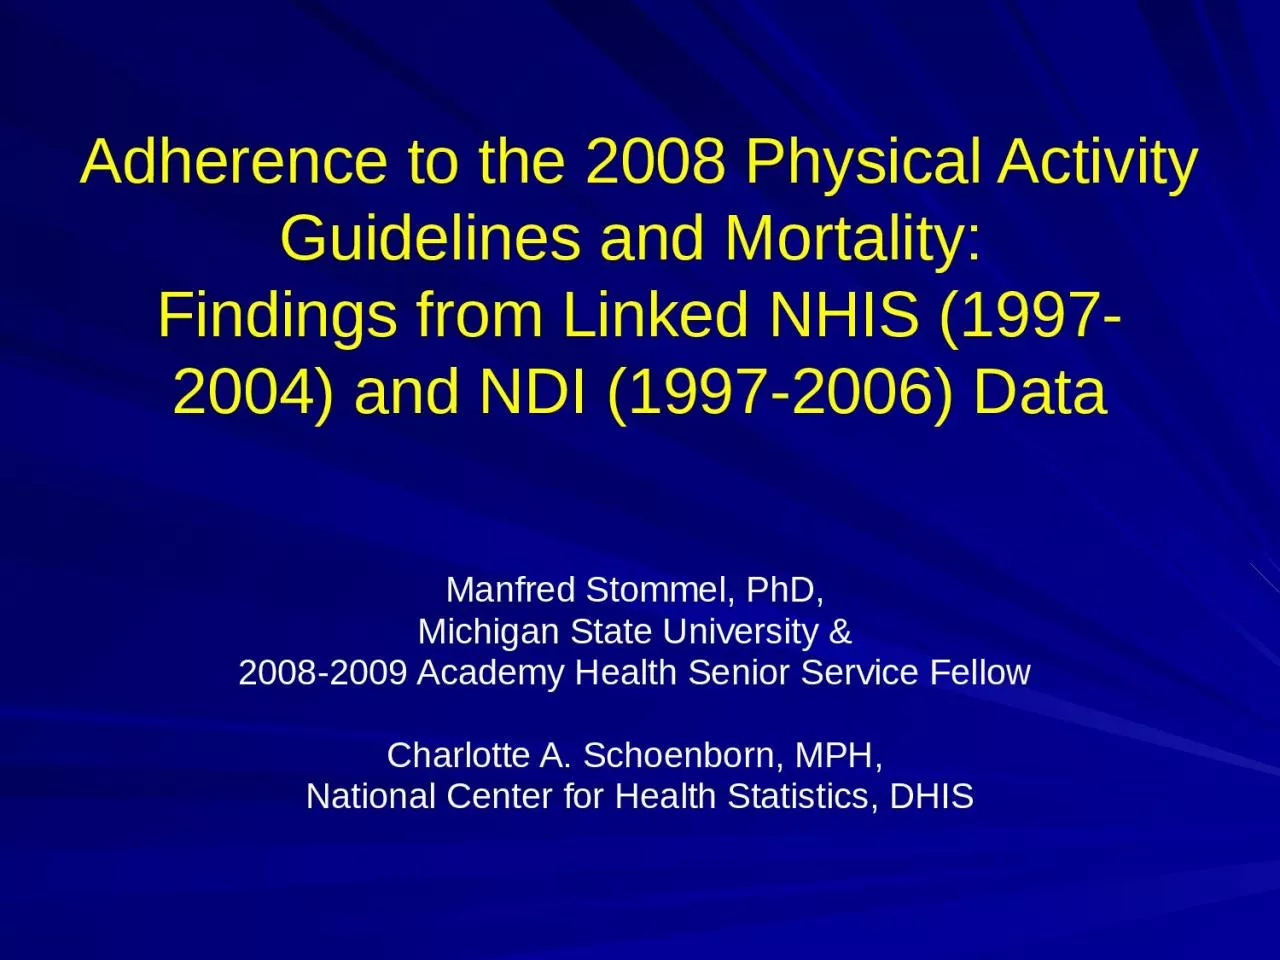 Adherence to the 2008 Physical Activity Guidelines and Mortality: